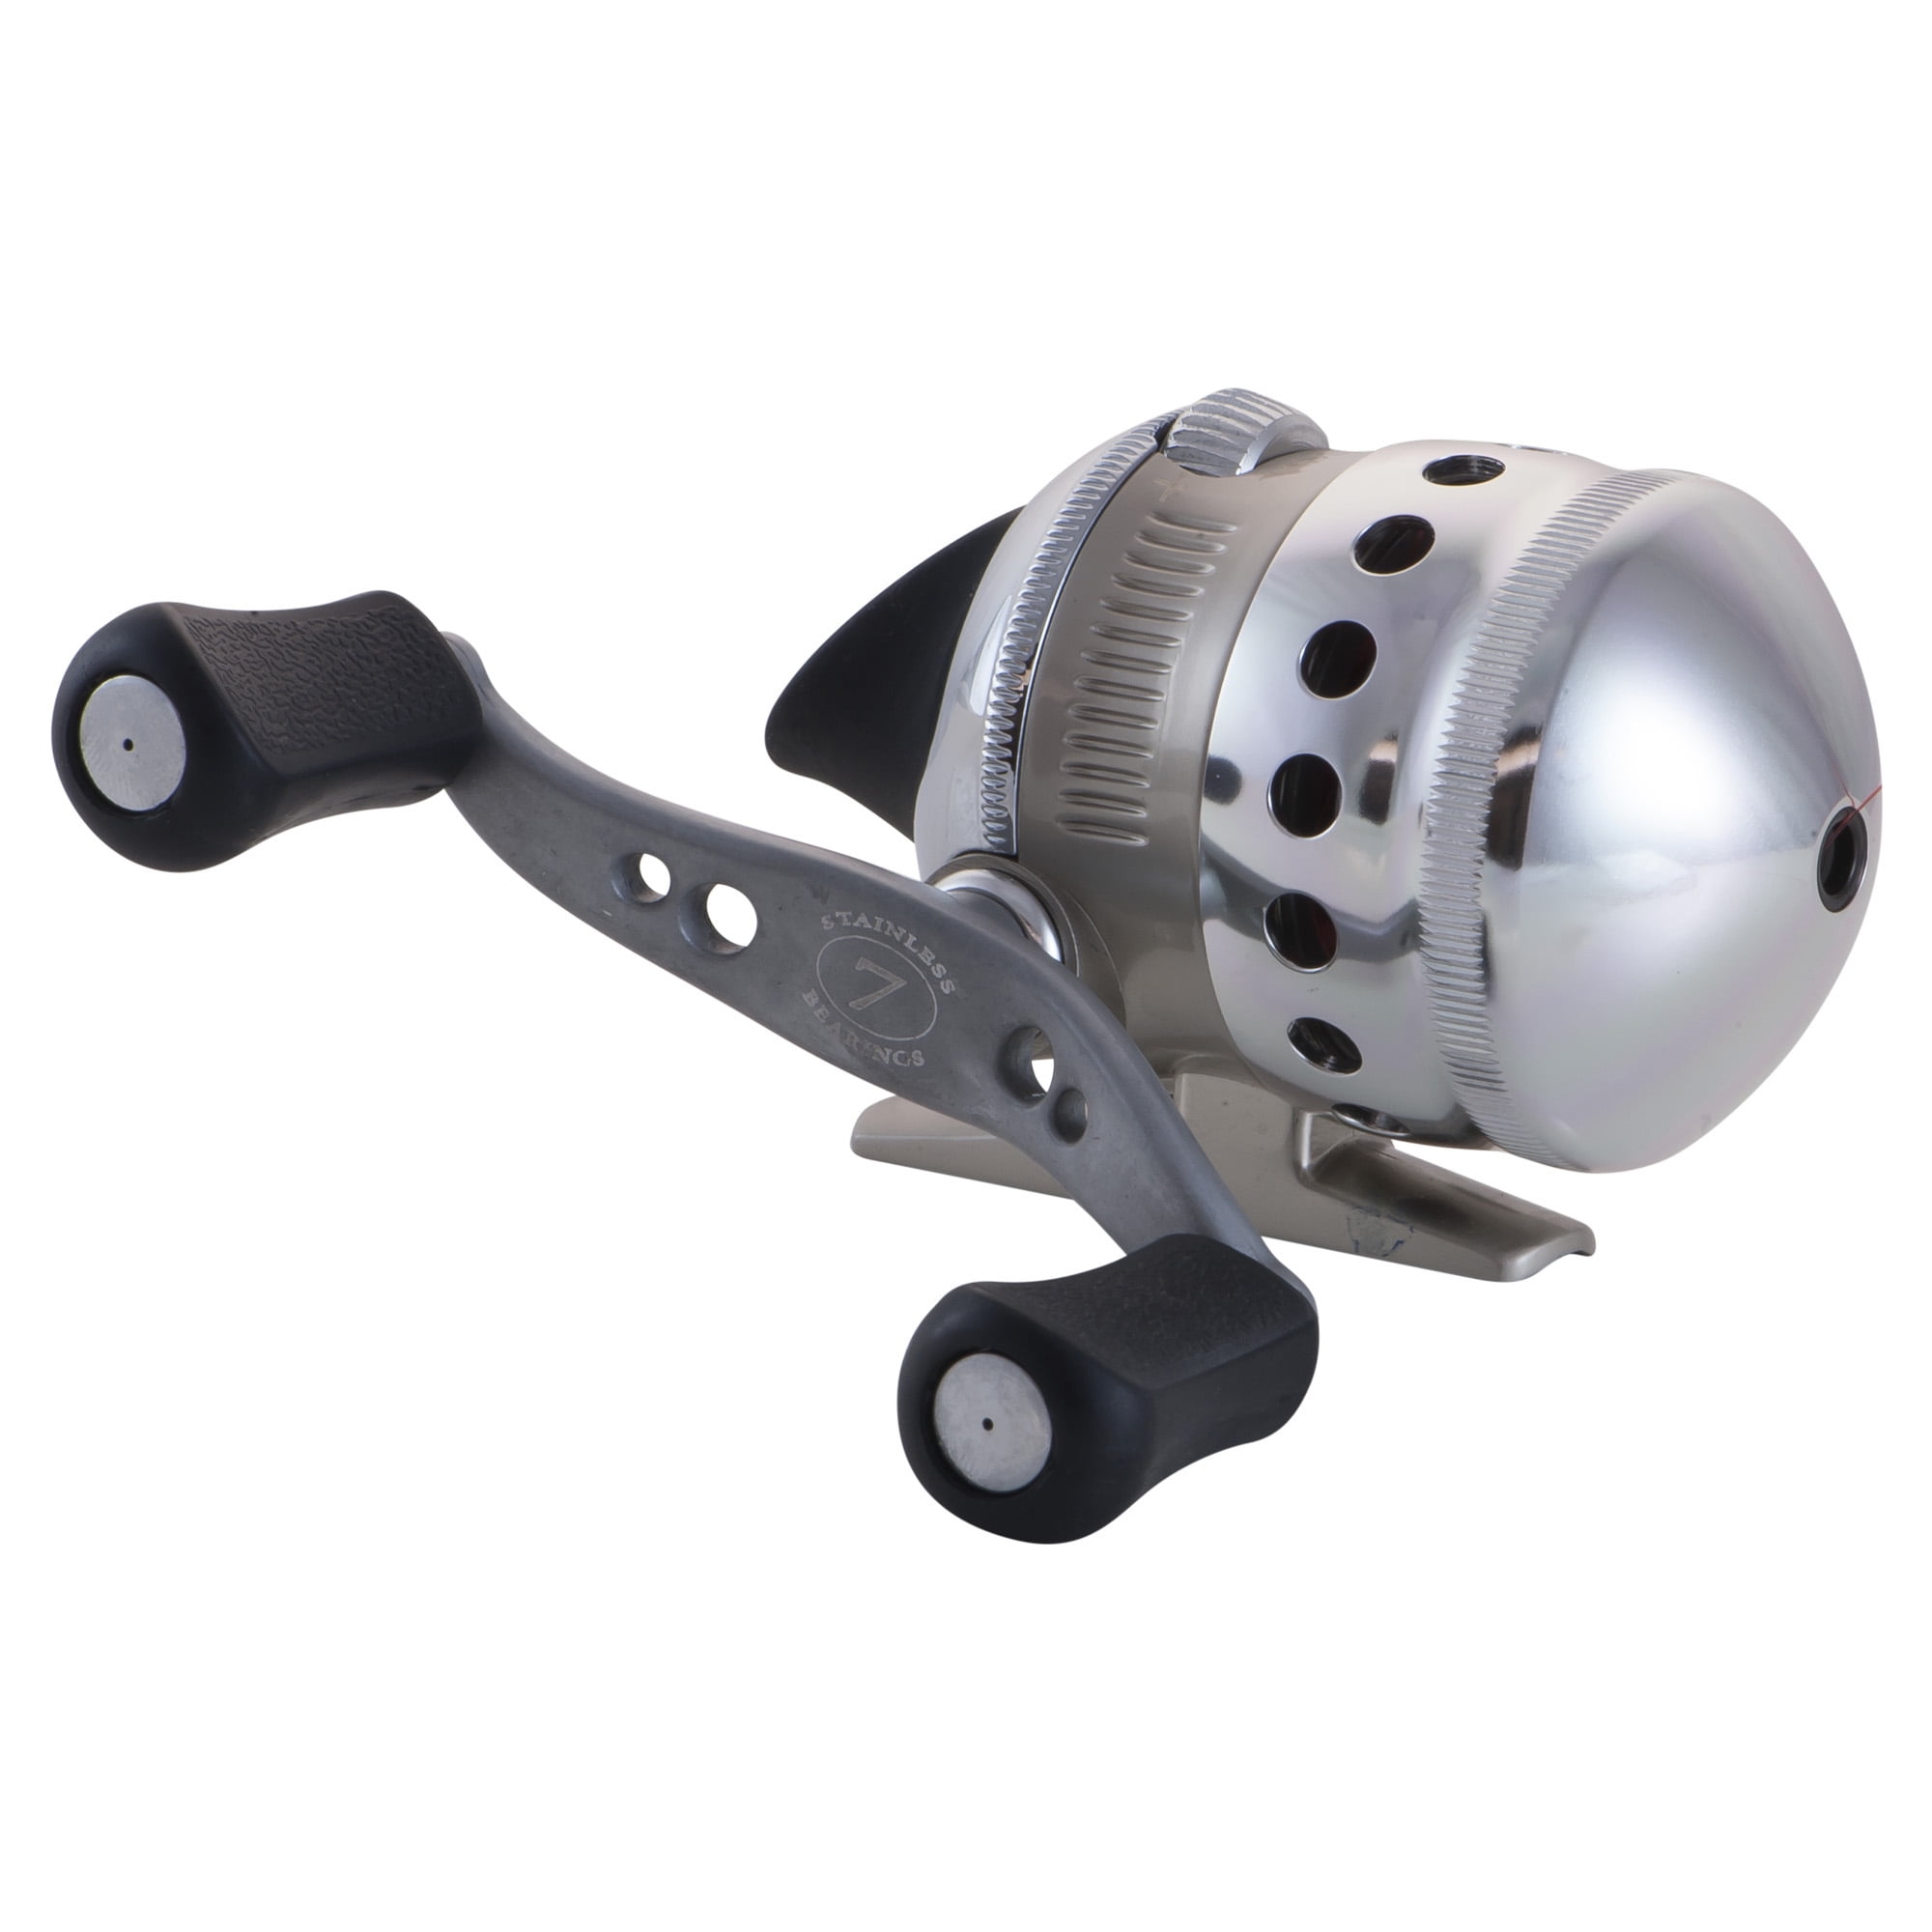 Zebco Omega Spincast Fishing Reel, Size 20 Reel, Changeable Right or  Left-Hand Retrieve, Pre-Spooled with 6-Pound Zebco Fishing Line, Aluminum  and